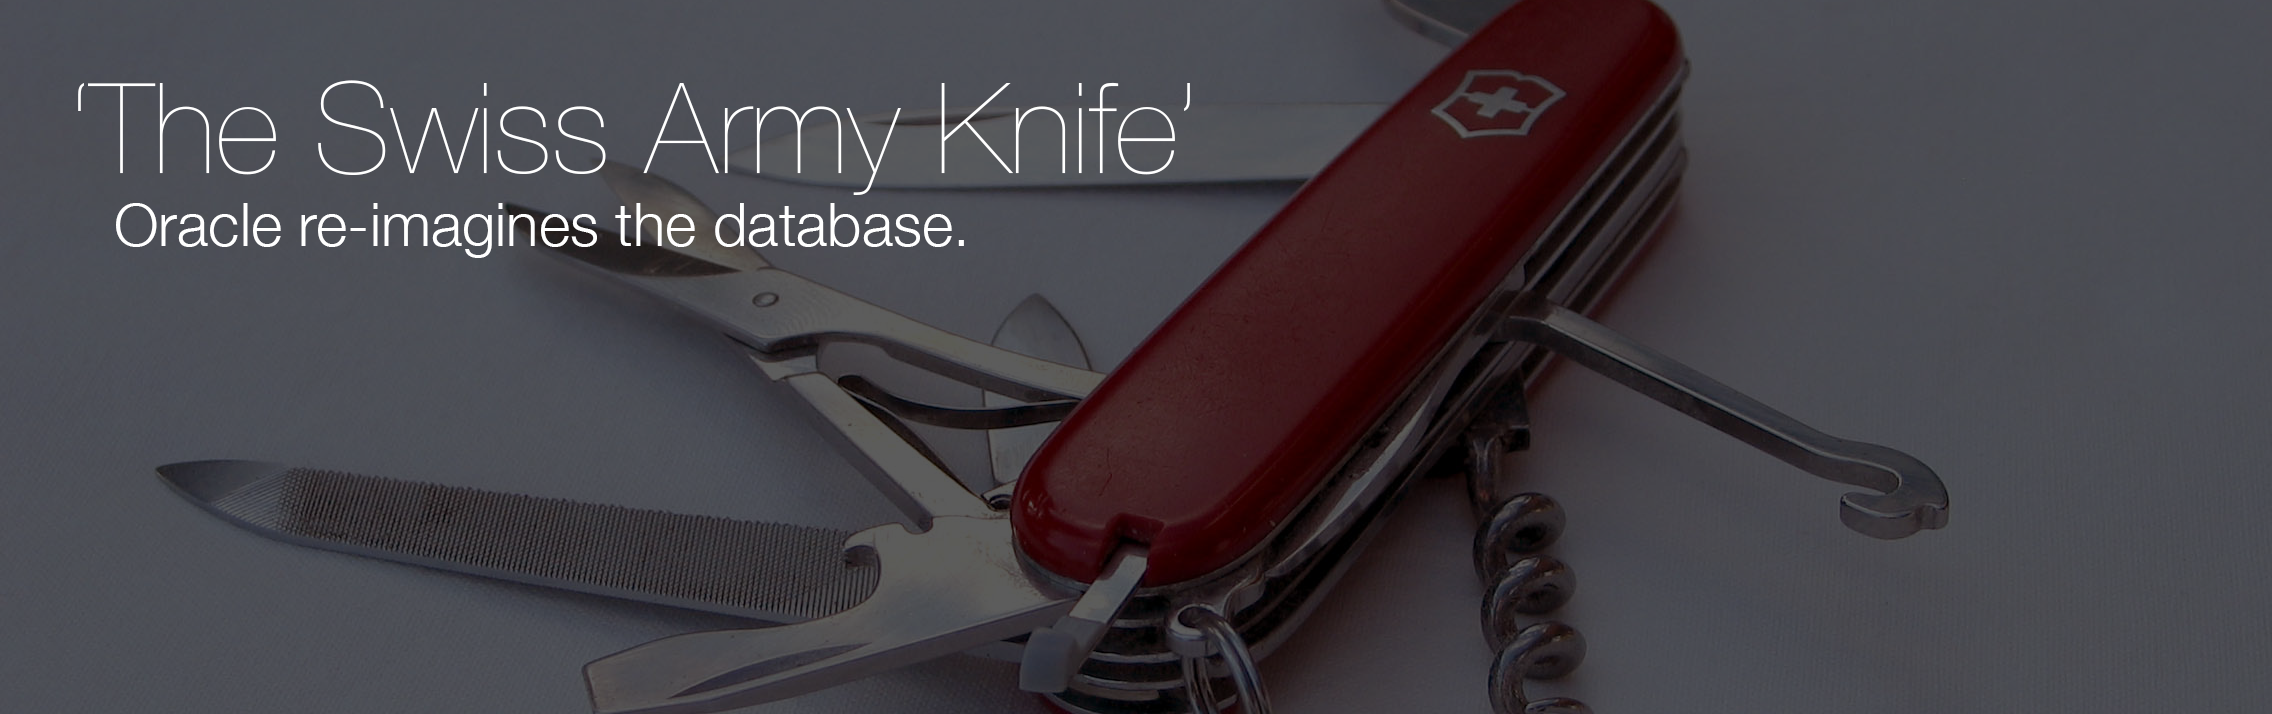 OpenWorld: Oracle reveals the 'Swiss Army Knife' of databases